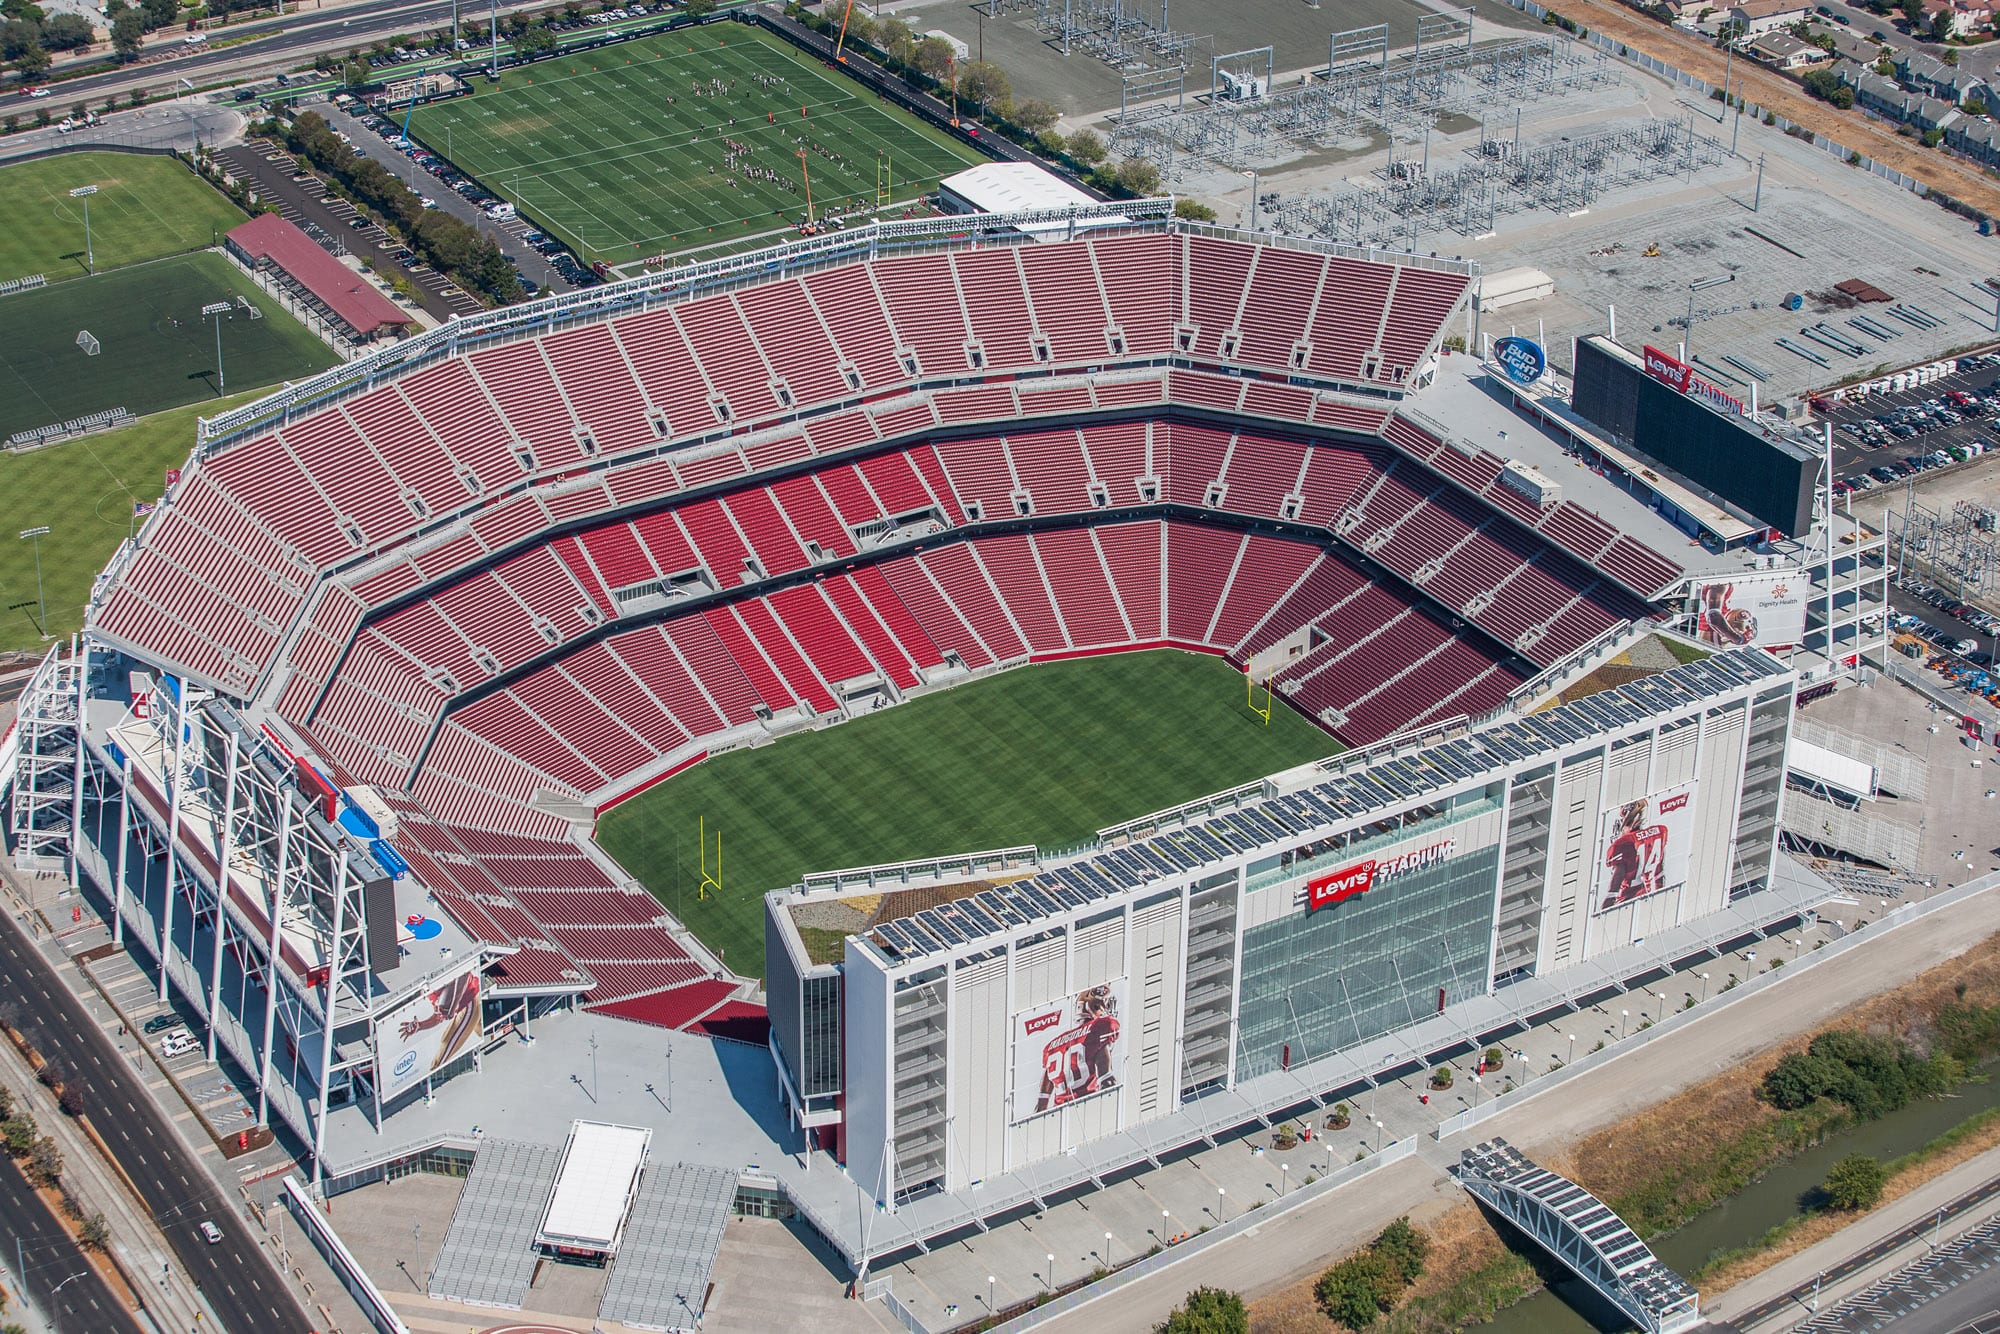 Construction of new 49ers stadium to bring jobs to Woodland